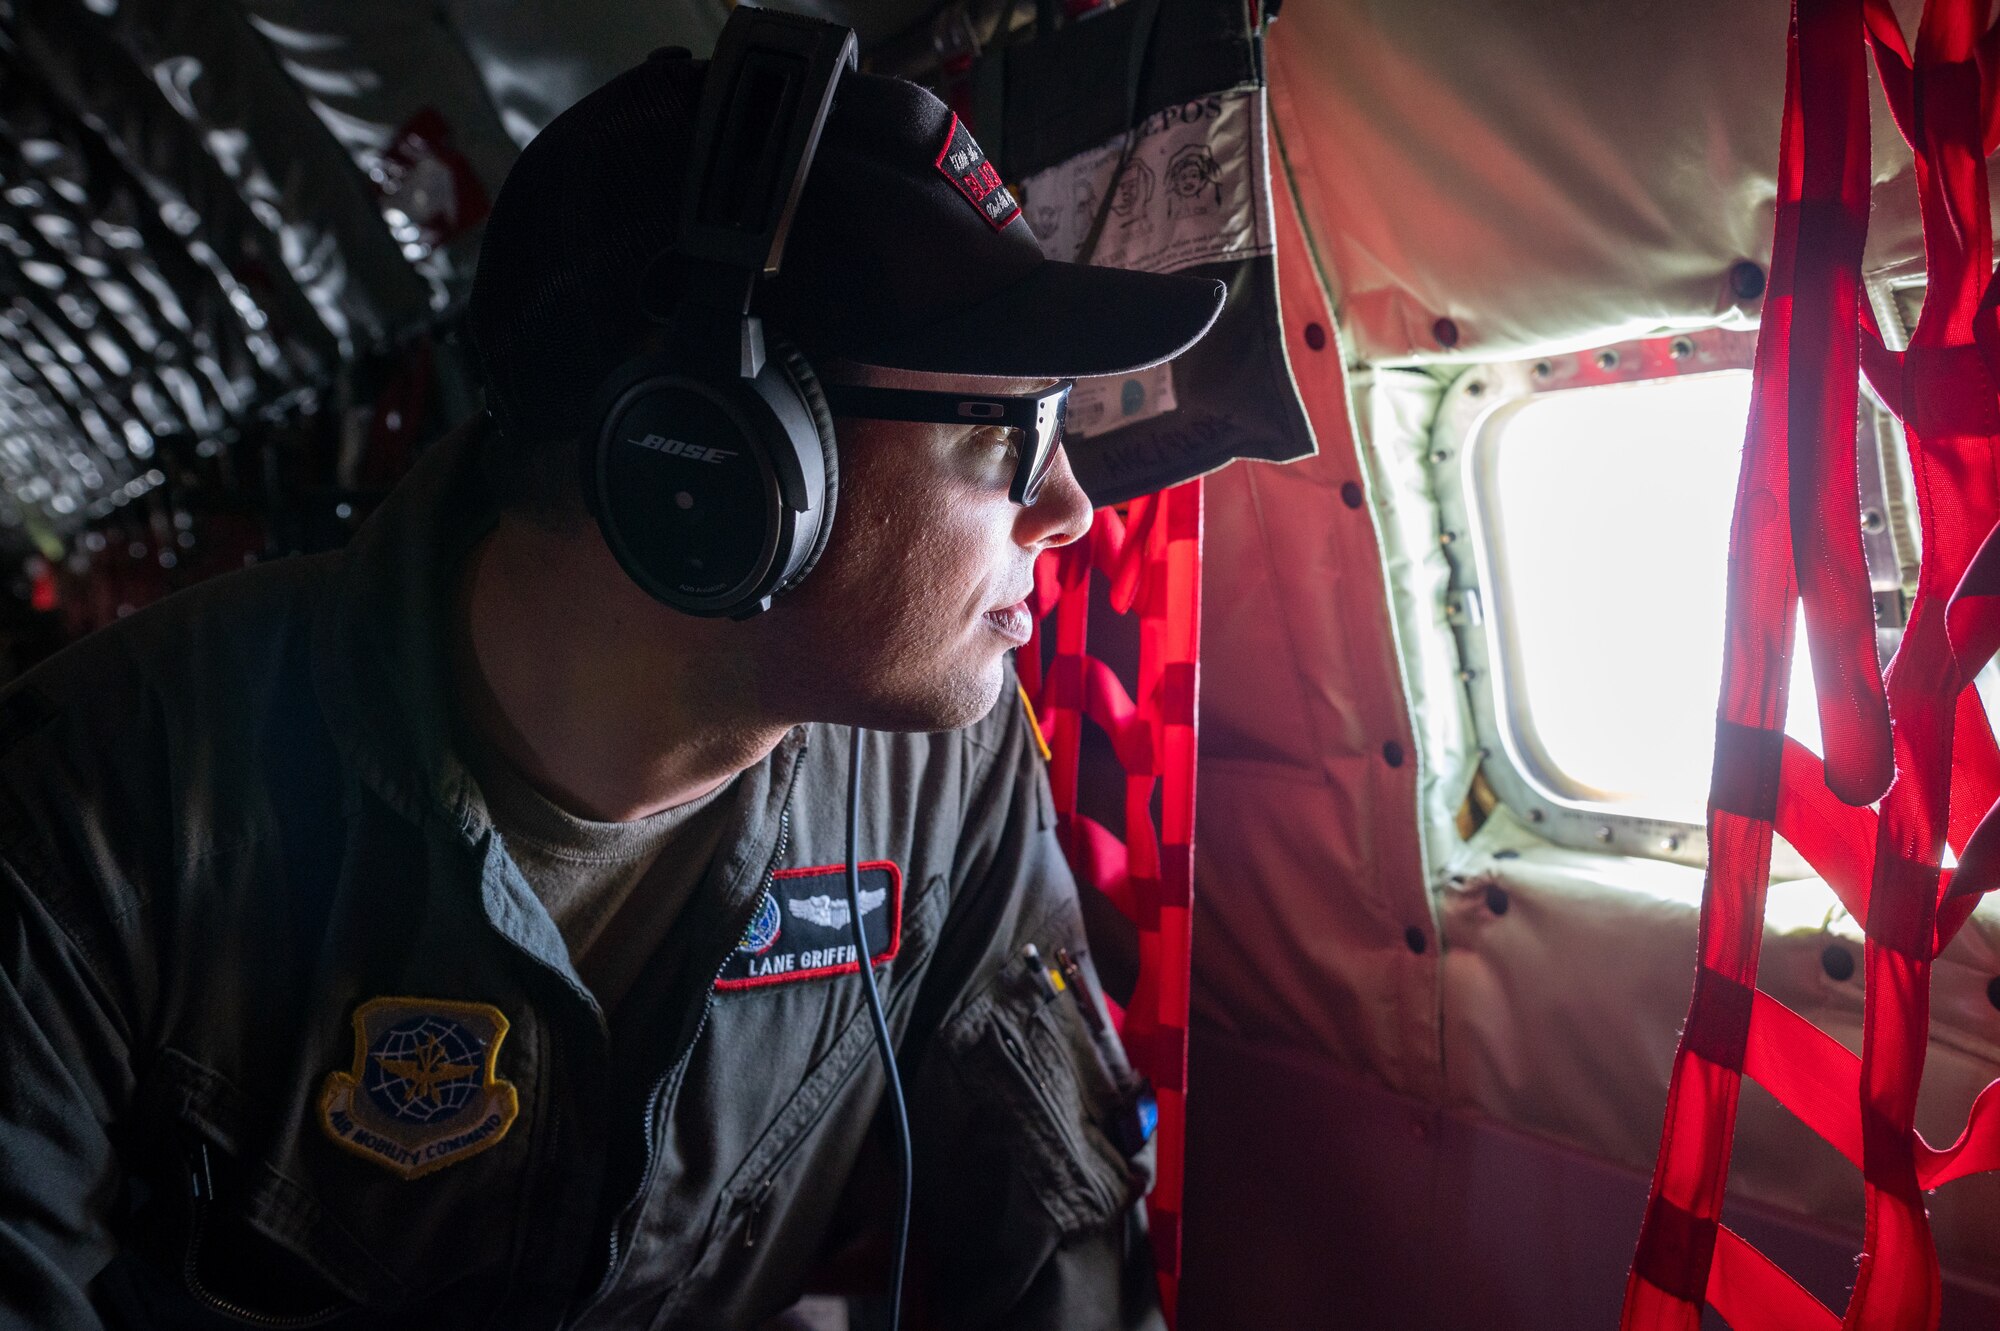 U.S. Air Force Capt Lane Griffin, 92nd Air Refueling Squadron pilot, looks out the window of a KC-135 Stratotanker during a Phase 3 Lead Wing exercise, June 6th, 2023. The exercise emphasized aircrew endurance while crew resting on the aircraft, wearing devices that track real time fatigue/stress on the aircrew, dynamic air refueling concepts, testing of a variety of the KC-135 mission sets, and included an advanced 72-hour endurance event.